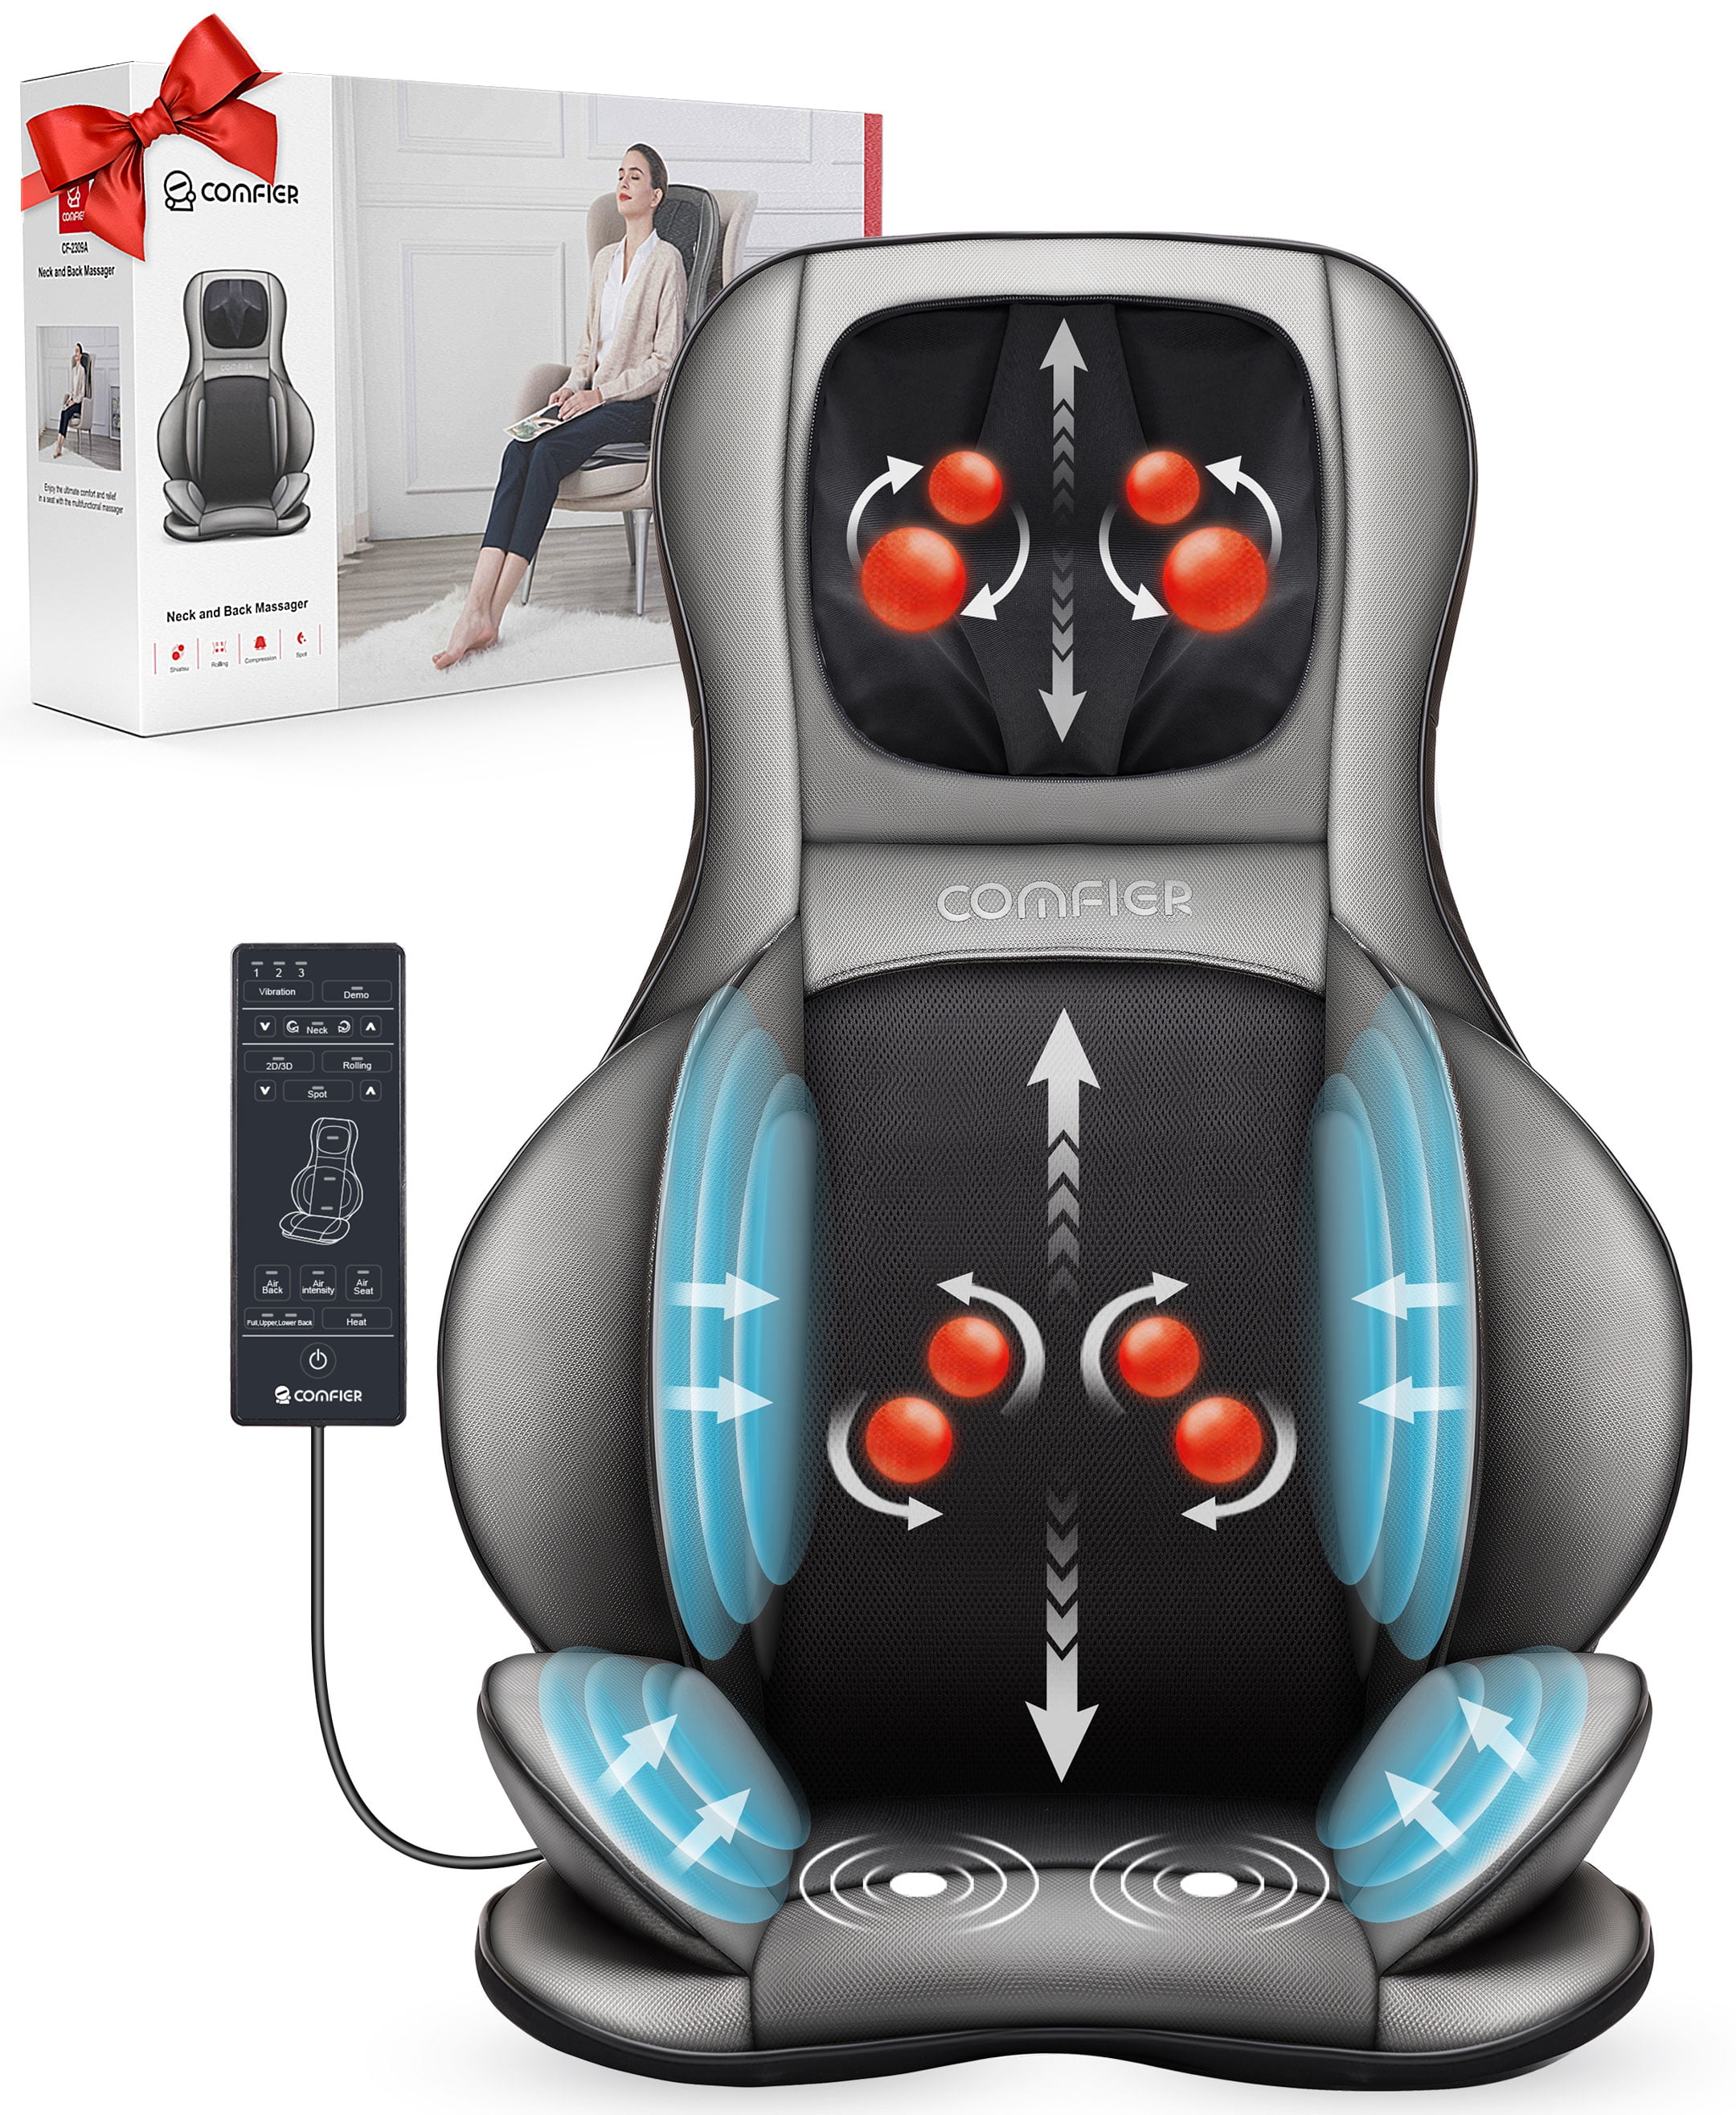  COMFIER Shiatsu Neck Back Massager with Heat, 2D ro 3D Kneading  Massage Chair Pad, Adjustable Compression Seat Massager for Full Body  Relaxation, Gifts for Women Men,Dark Gray : Health & Household